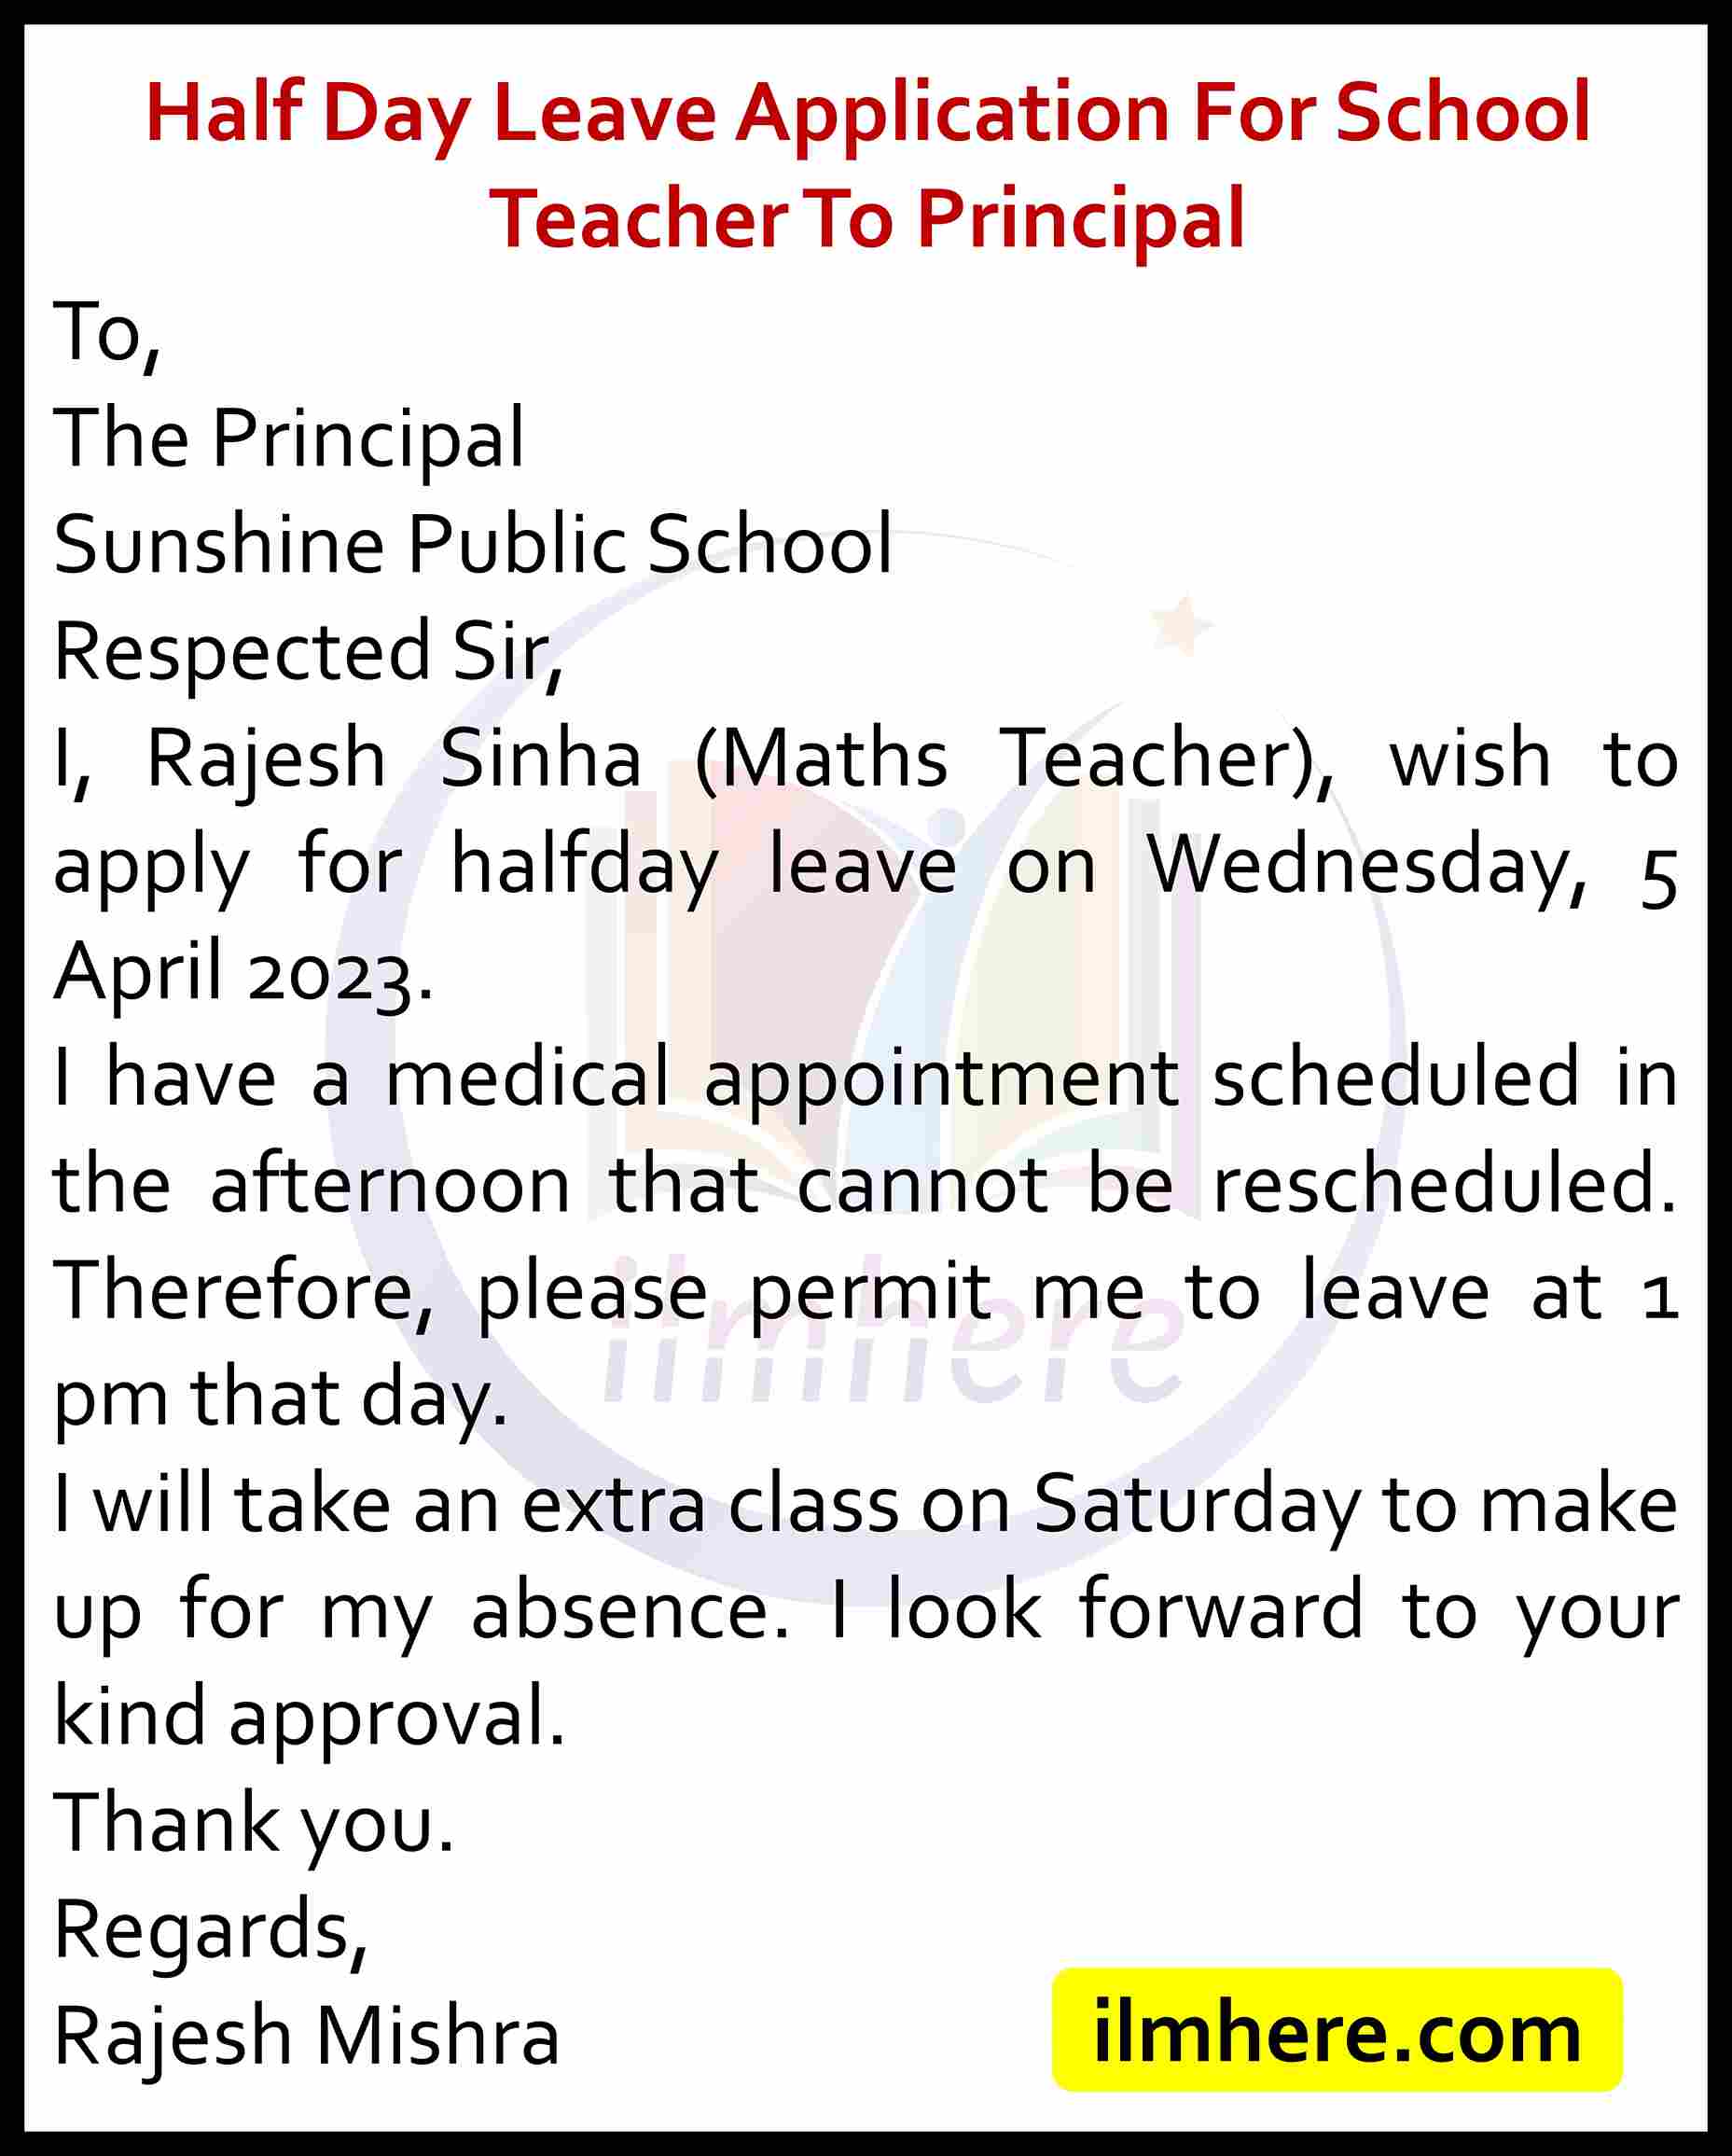 Half Day Leave Application For School Teacher To Principal